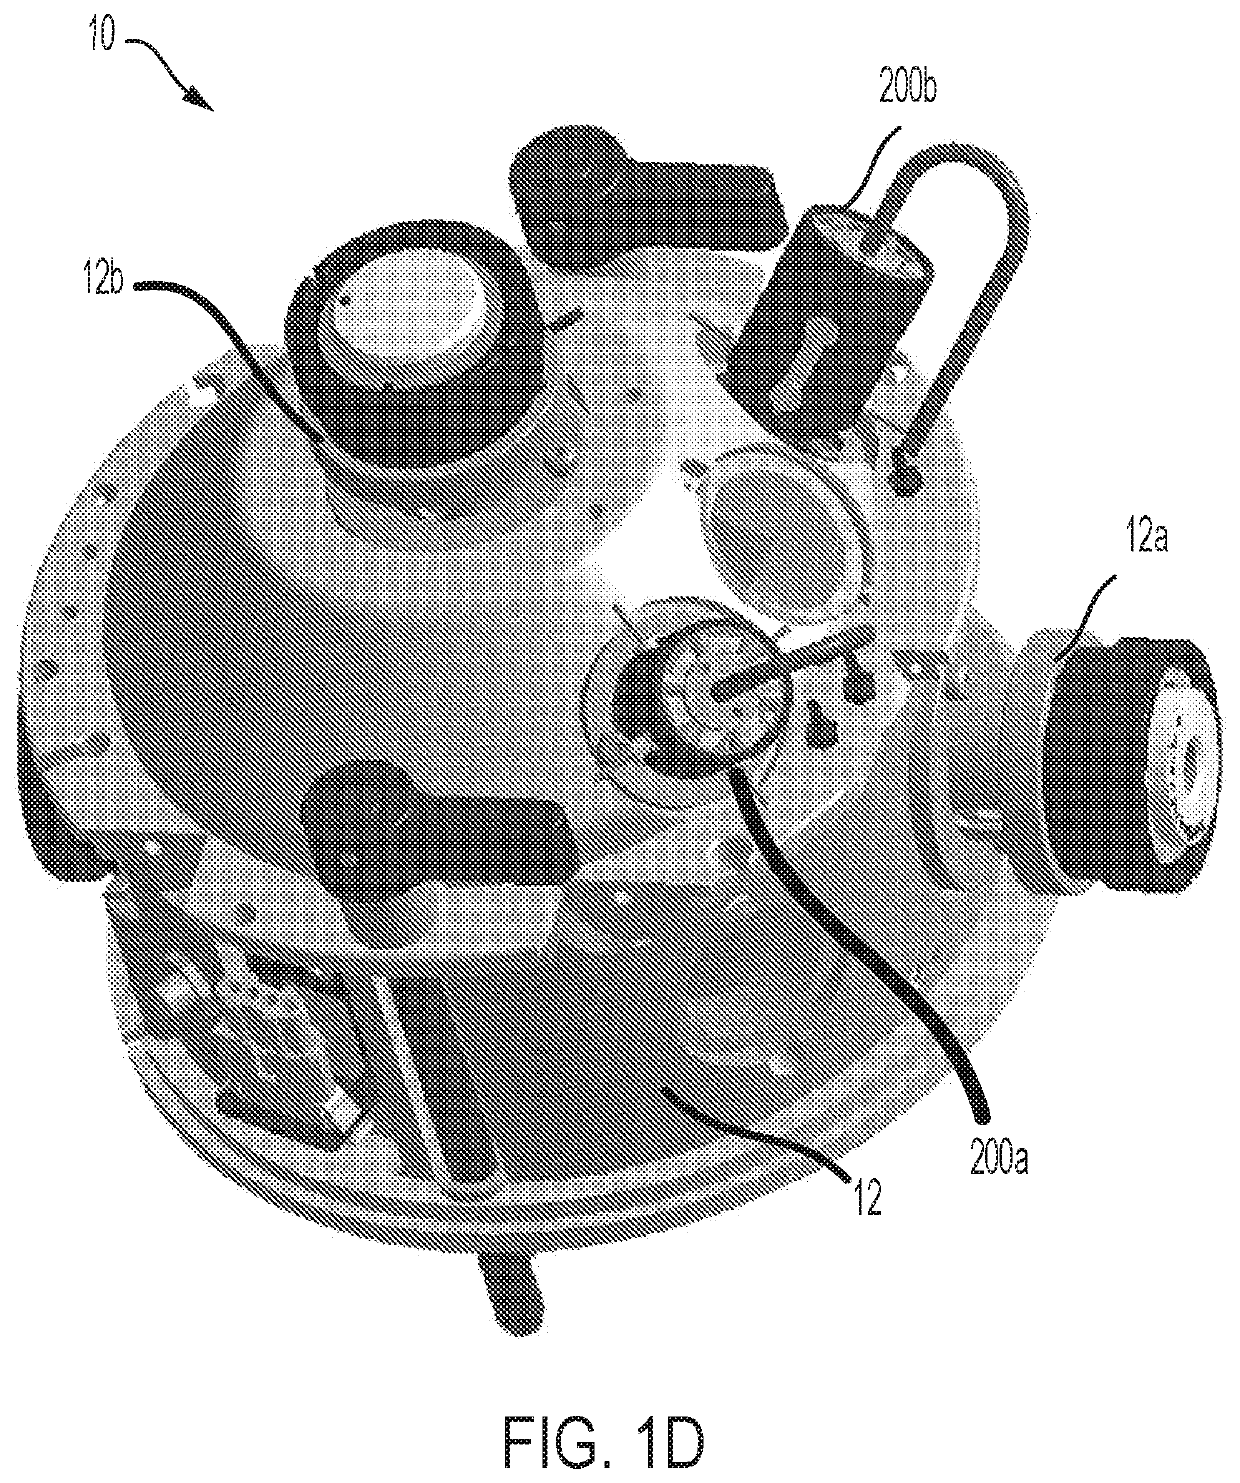 Integrated electrospray ion source